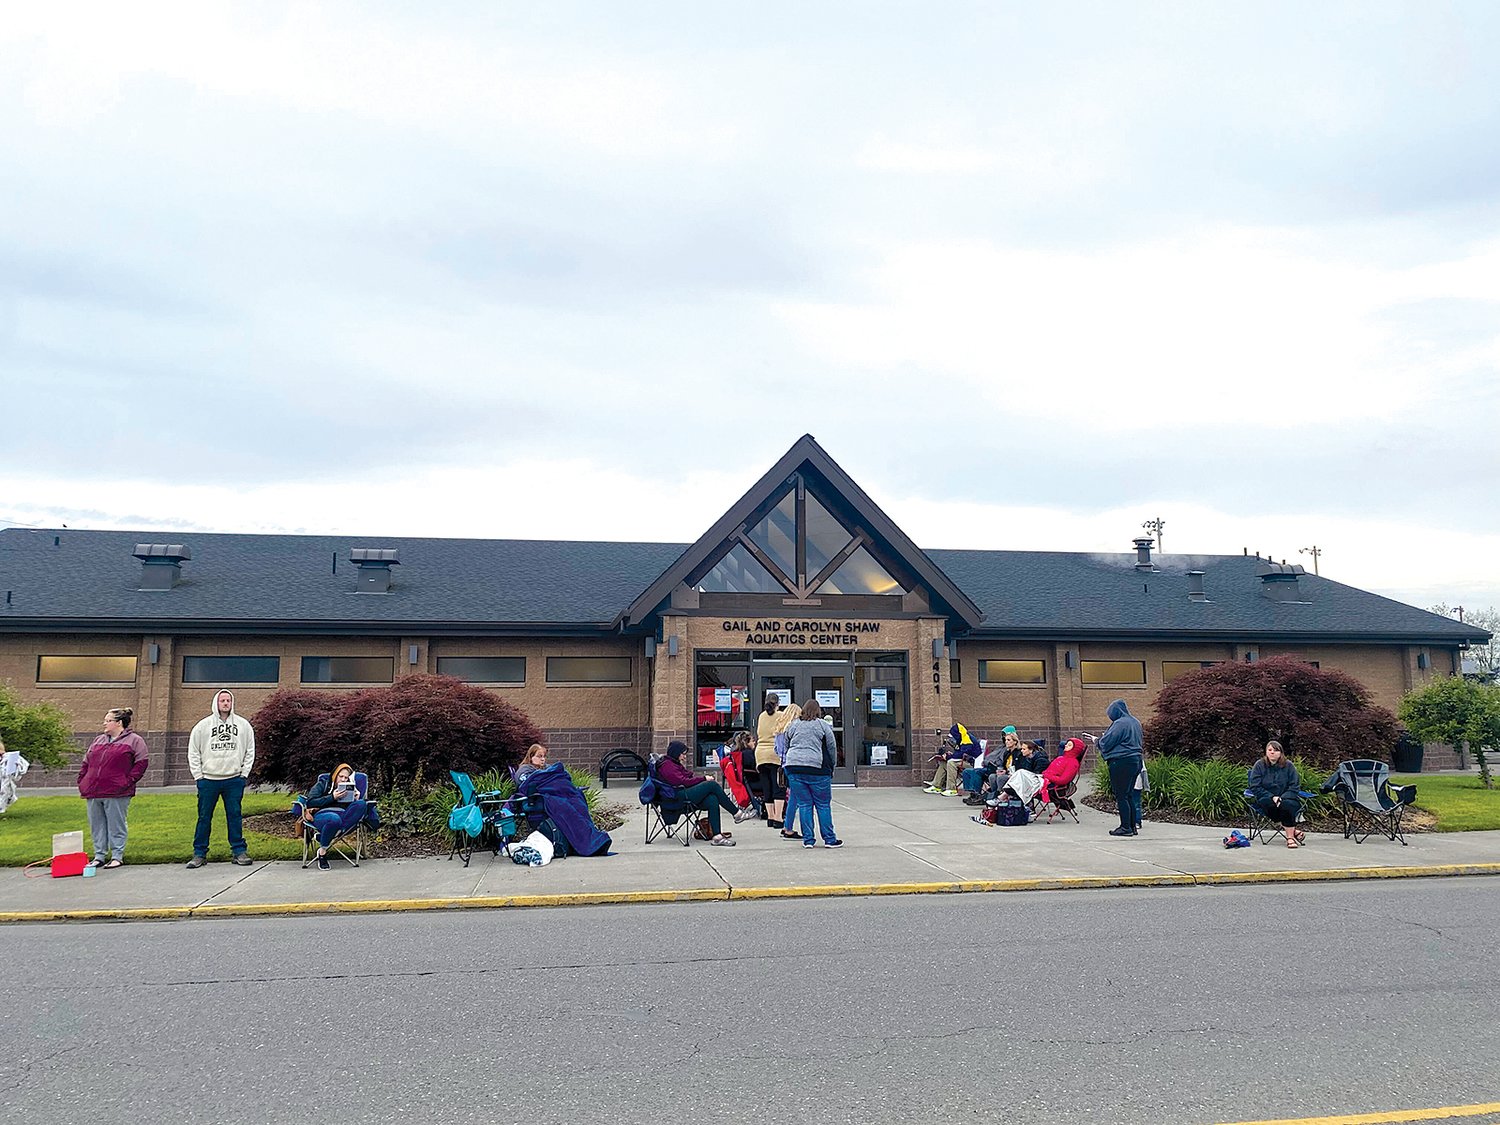 Residents line up outside the Gail and Carolyn Shaw Aquatics Center to sign up for swimming lessons at about 6:20 a.m. Friday.